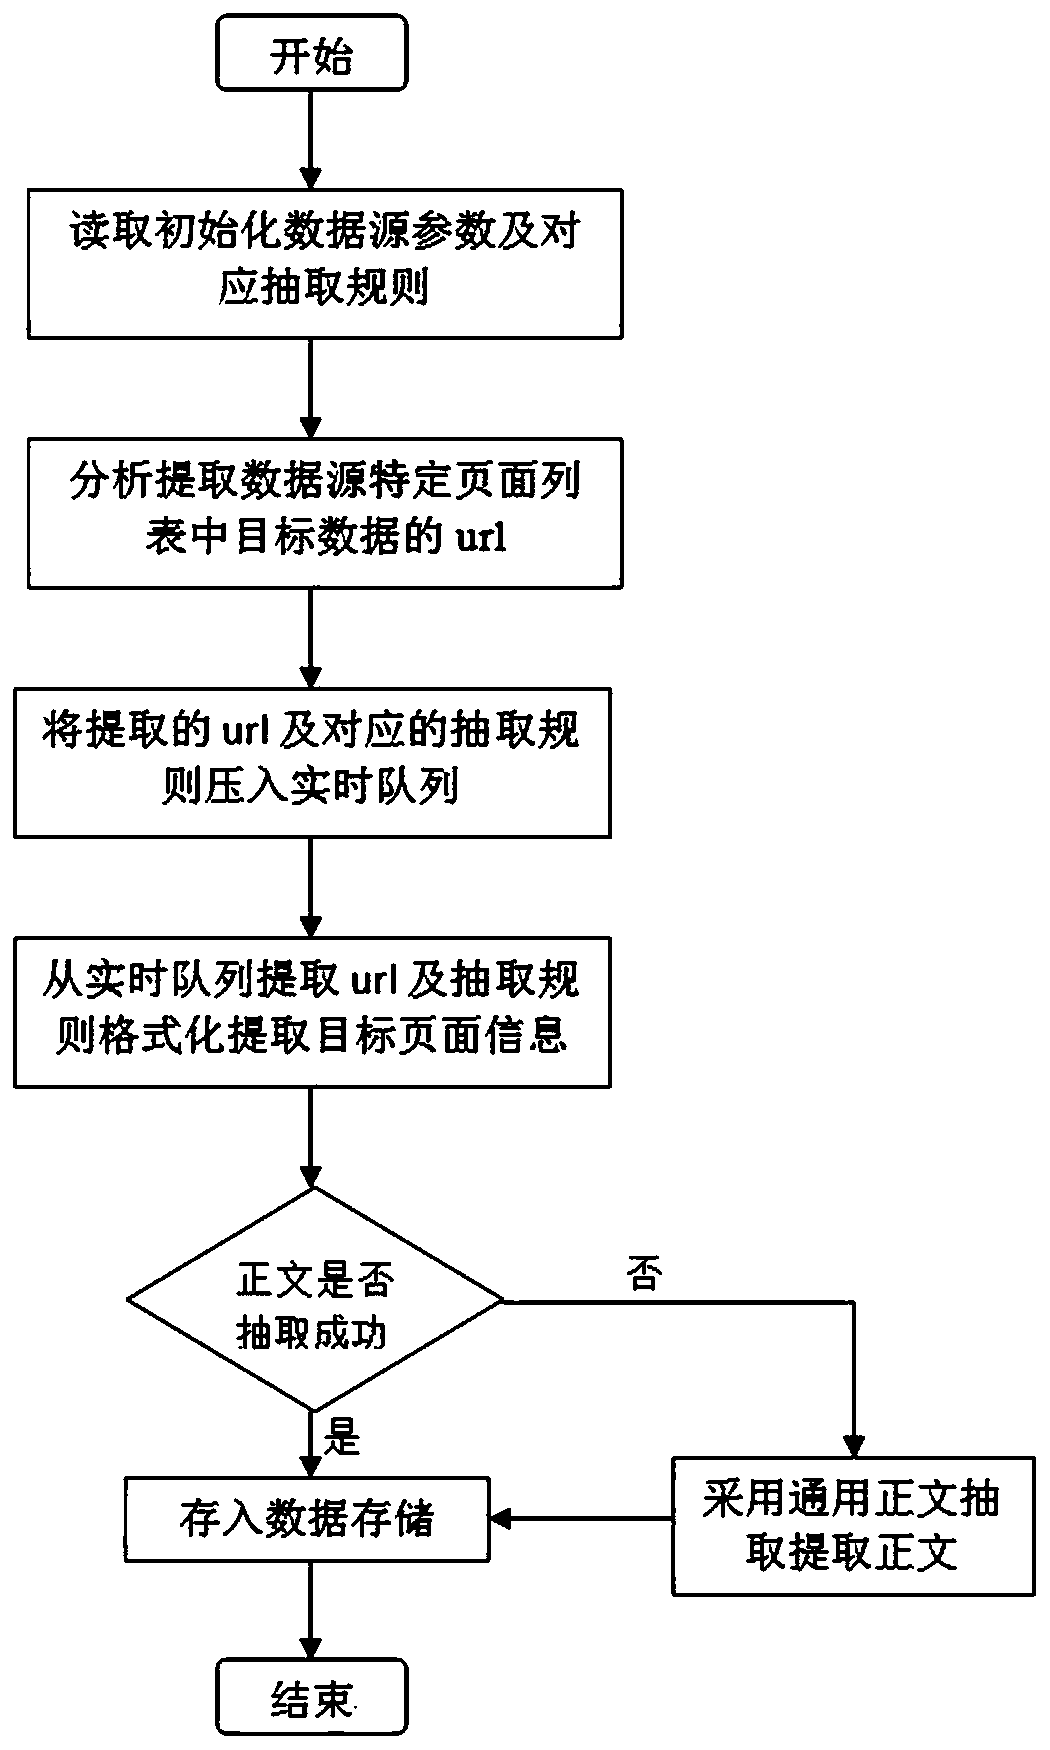 A Distributed Internet Data Rapid Acquisition System and Acquisition Method